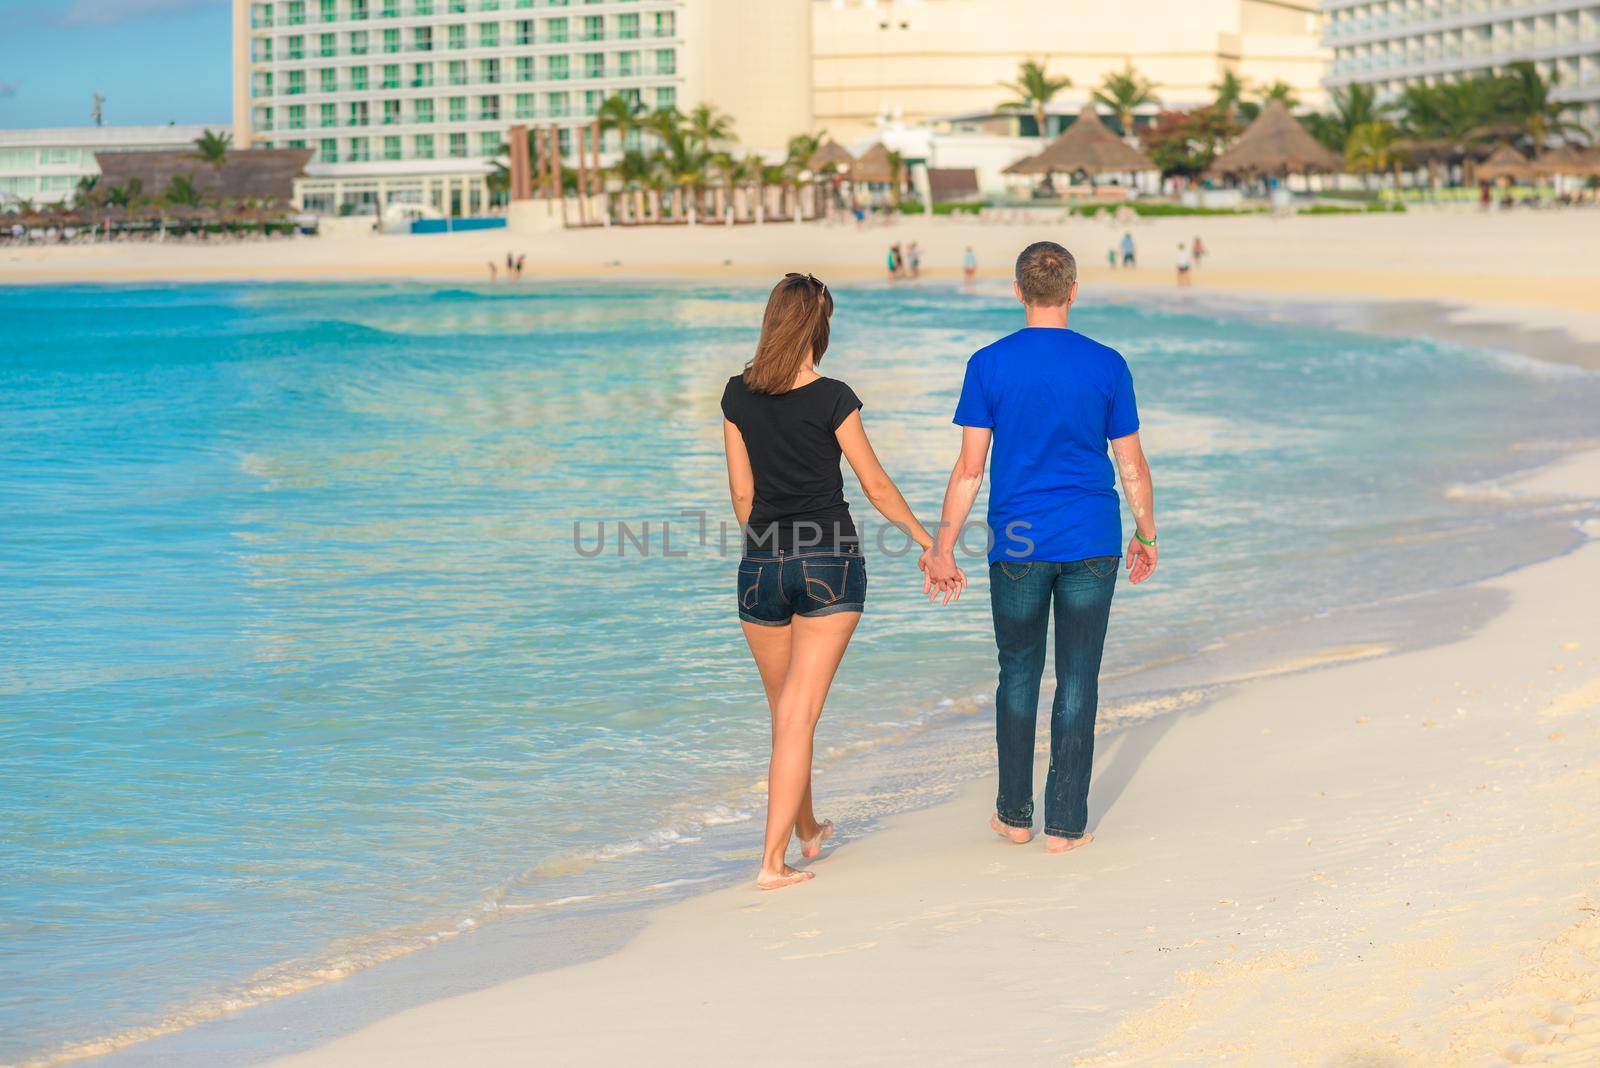 A man and a woman walk on the seashore.